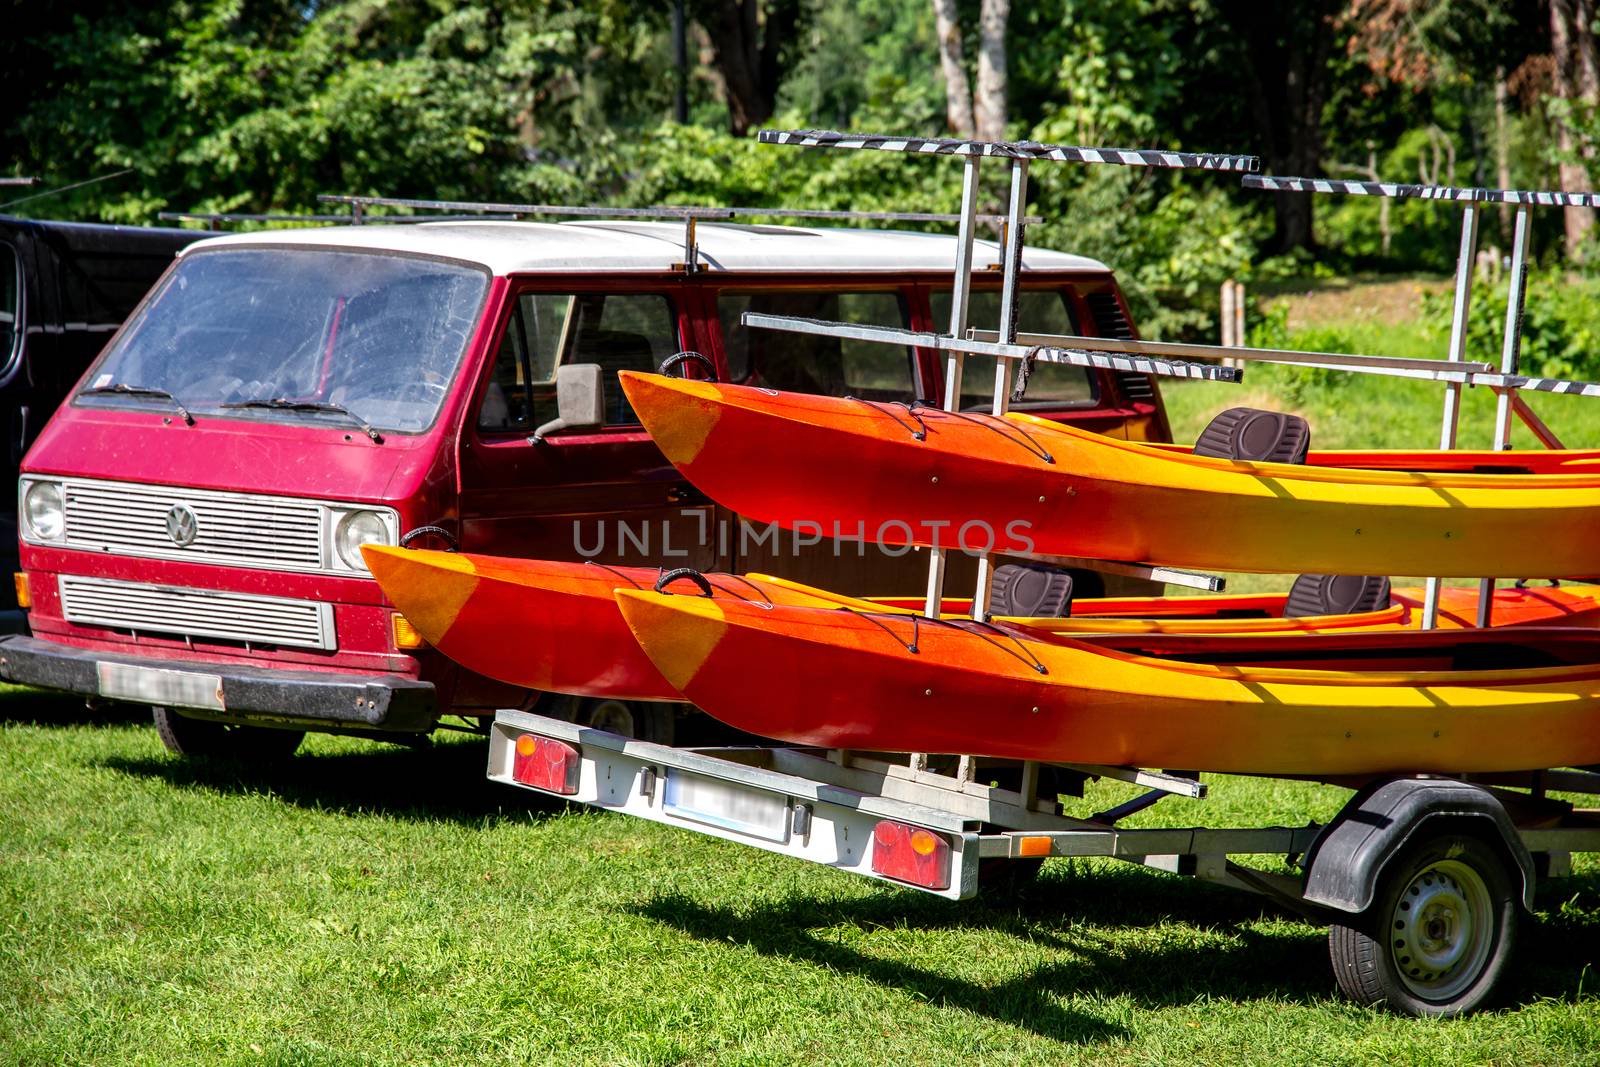 Kayaks for rent near to the river. by fotorobs